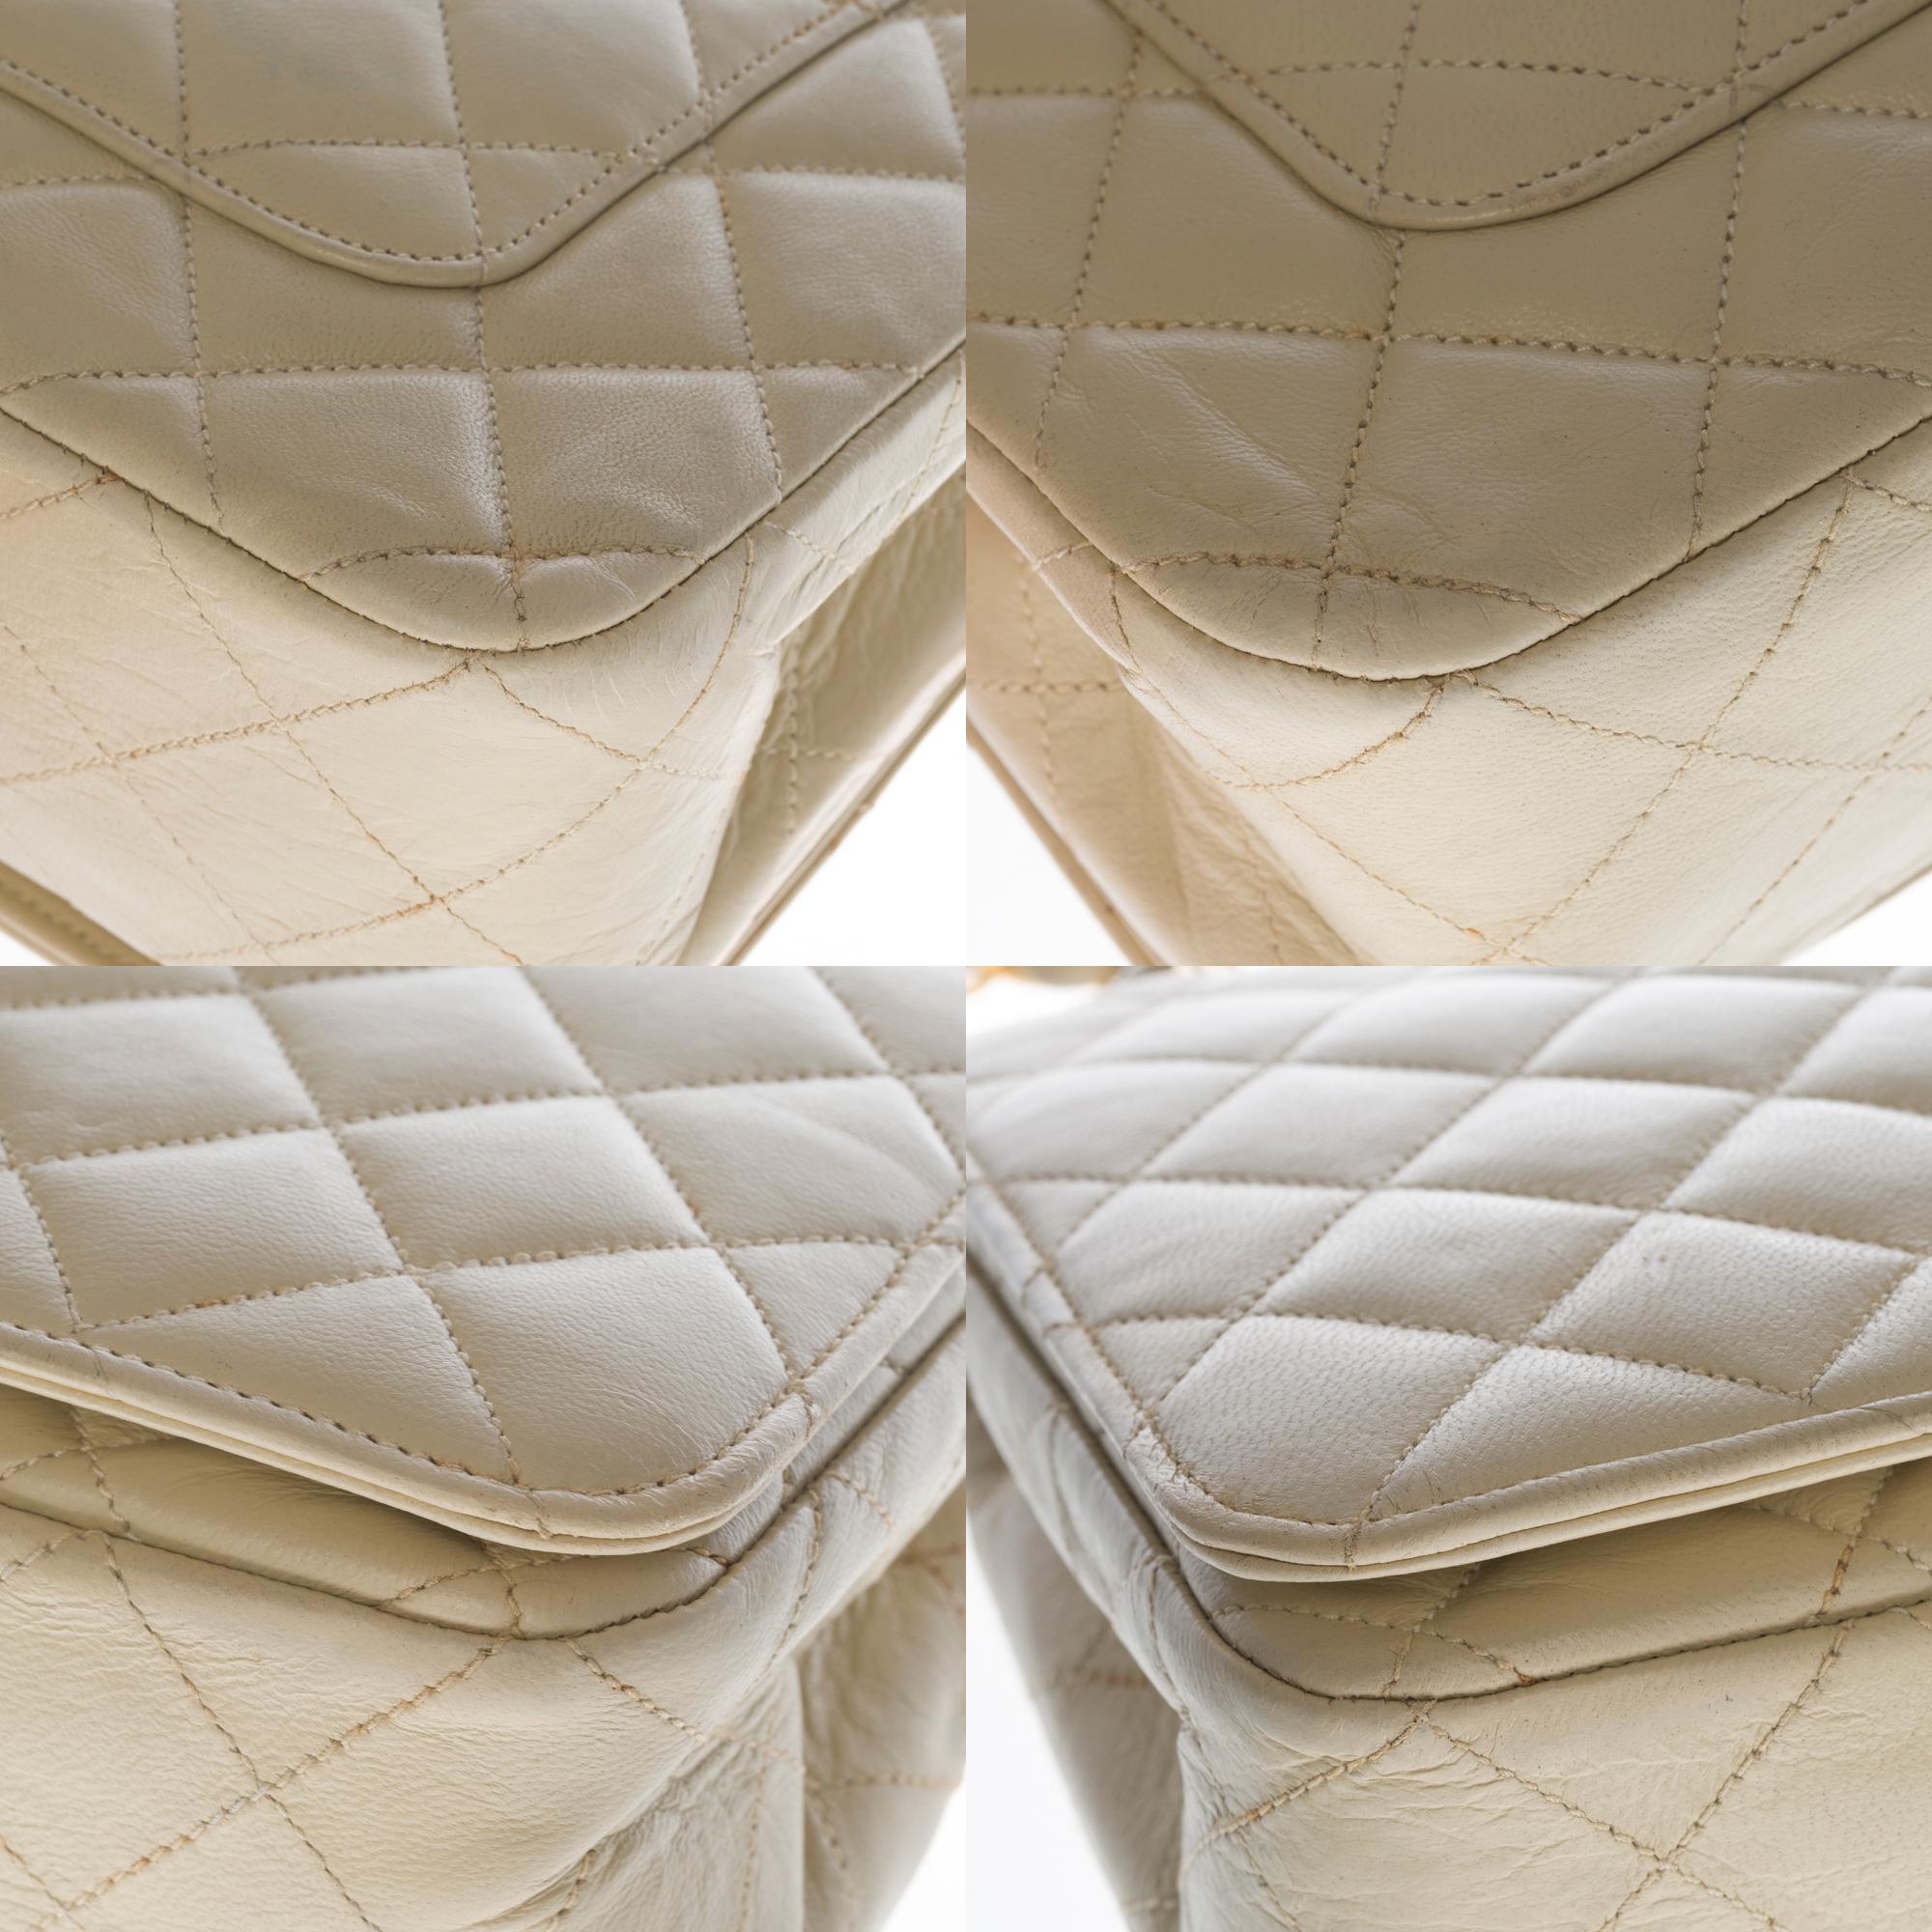 Chanel Classic Full Flap shoulder bag in beige quilted leather and GHW 2